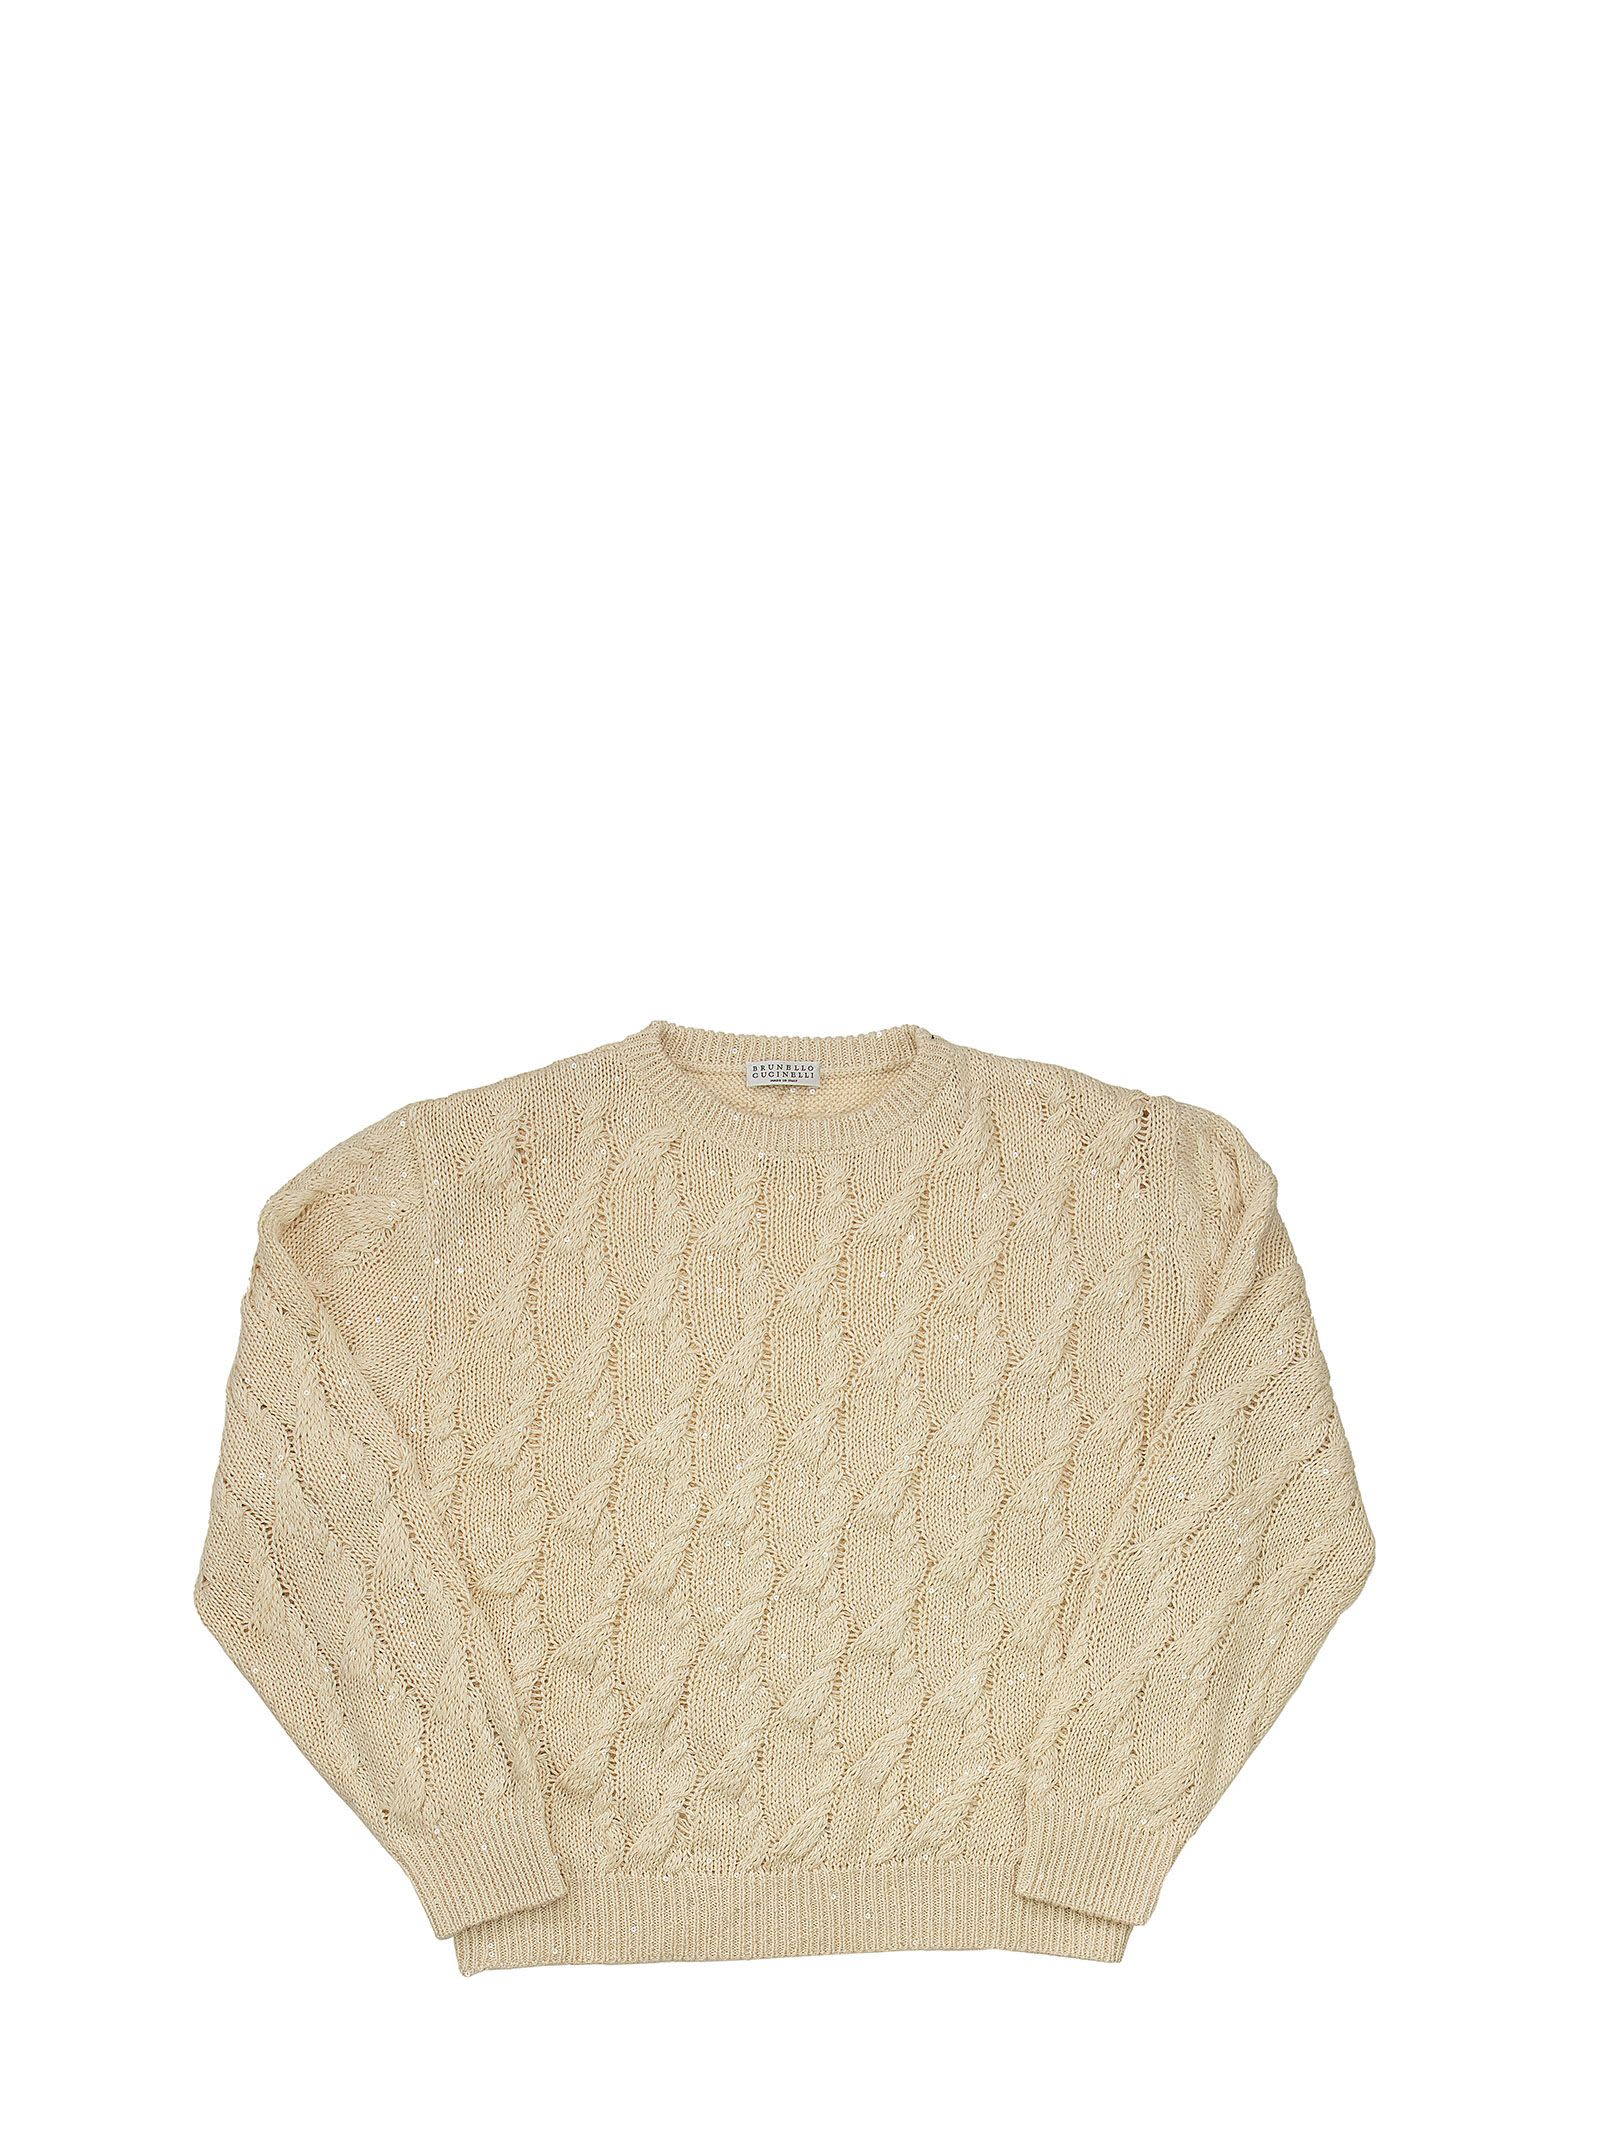 Brunello Cucinelli Lace-effect Cables Sweater In Linen And Silk Diamond Yarn